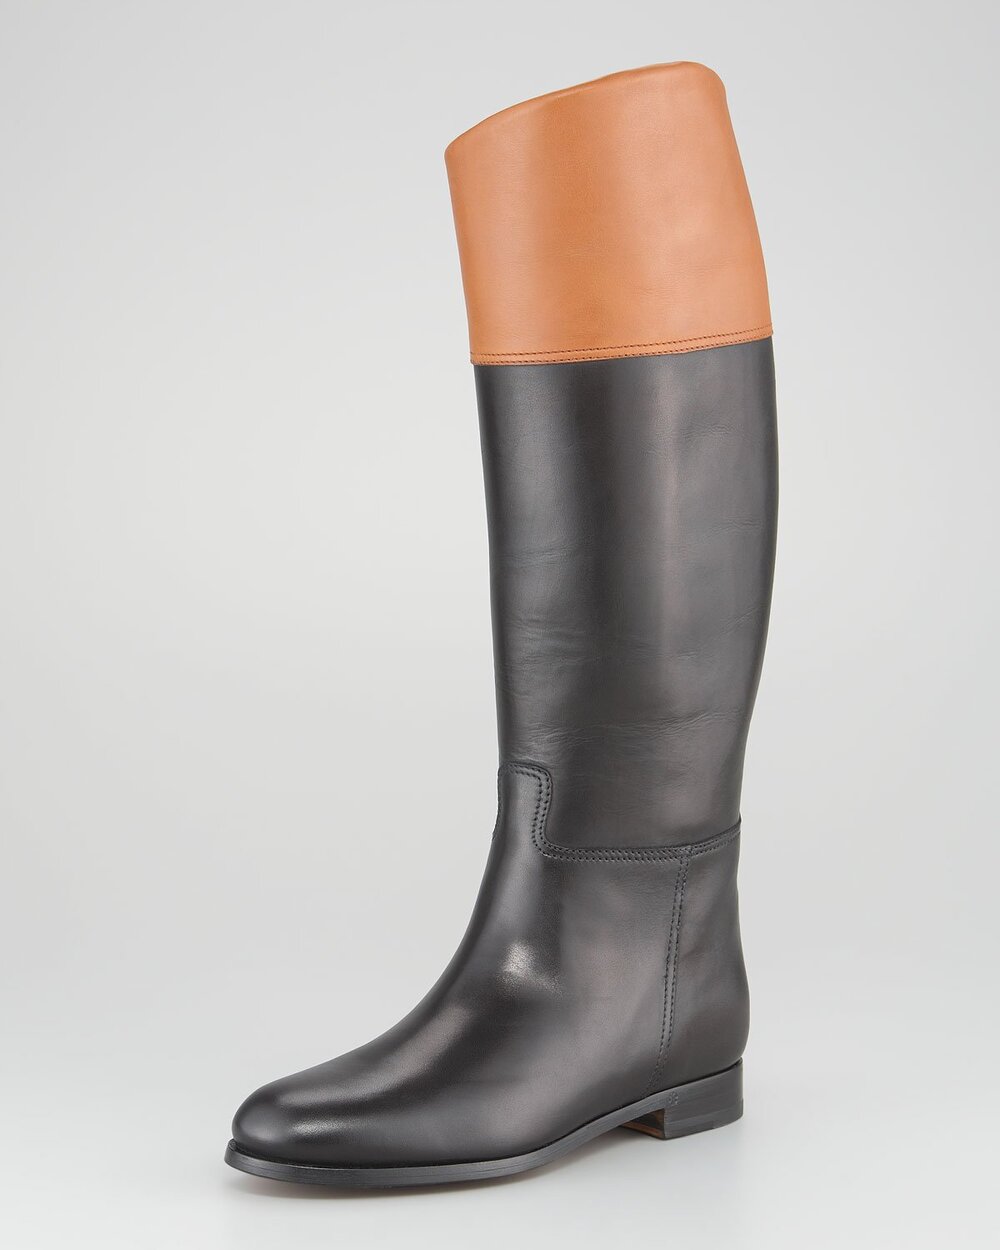 Ralph Lauren Sabella II Two-Tone Riding Boots in Black — UFO No More